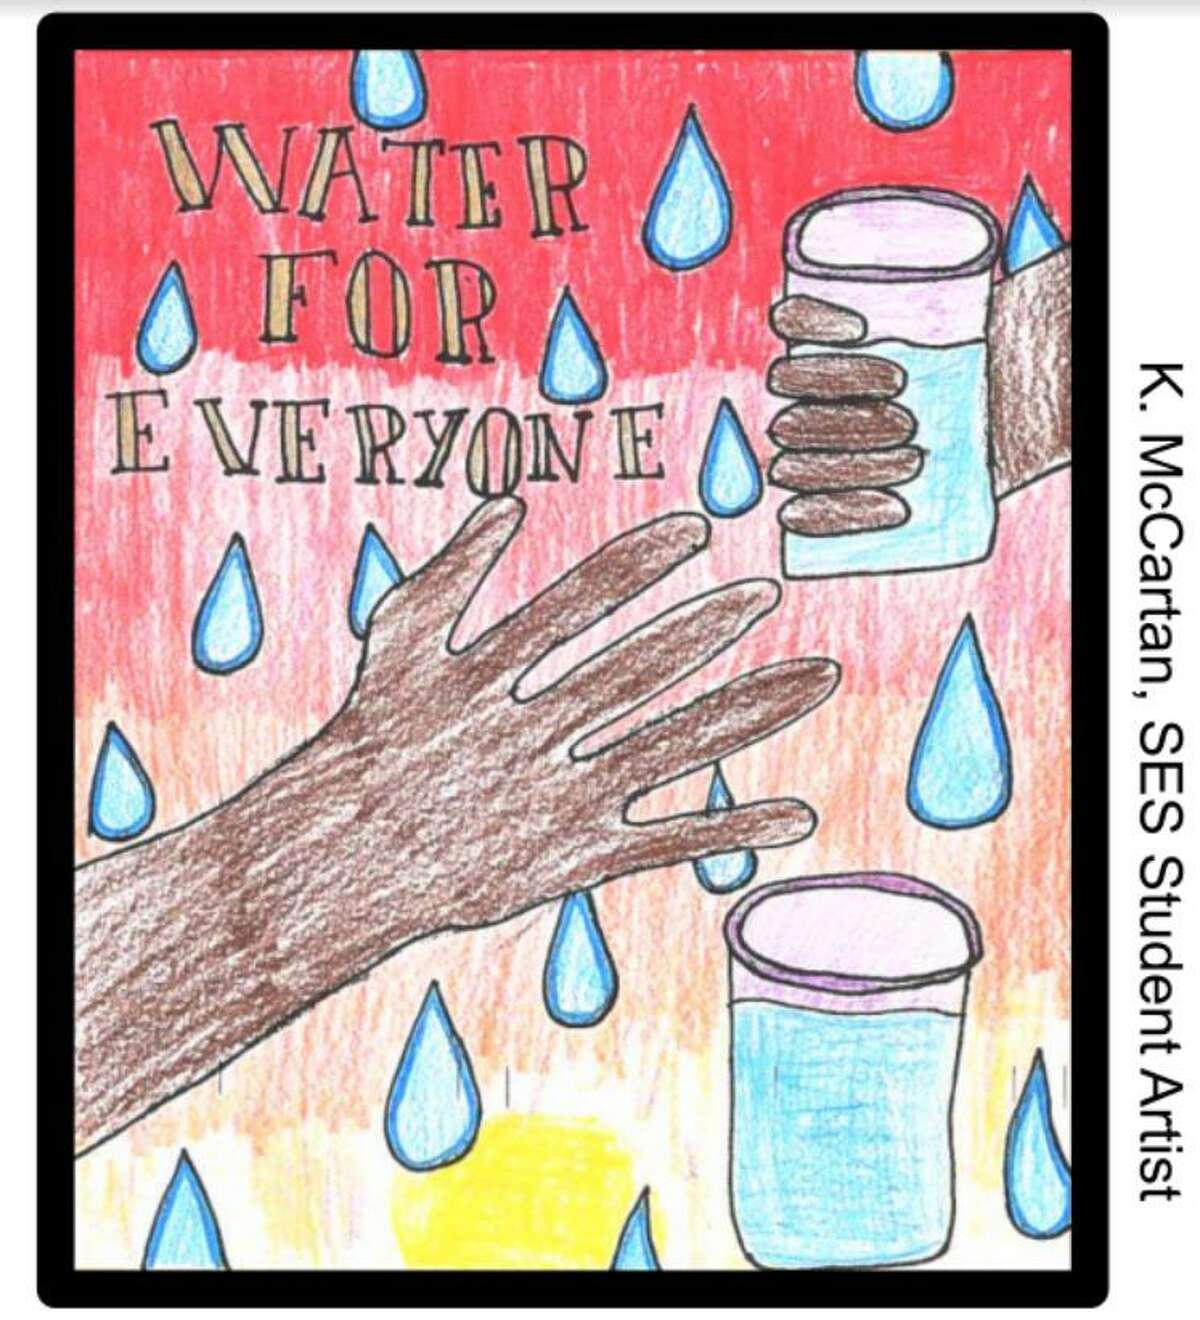 Scotland Elementary School hosted a school-wide art contest to design a logo for its fundraising campaign benefiting Water for South Sudan, a nonprofit.